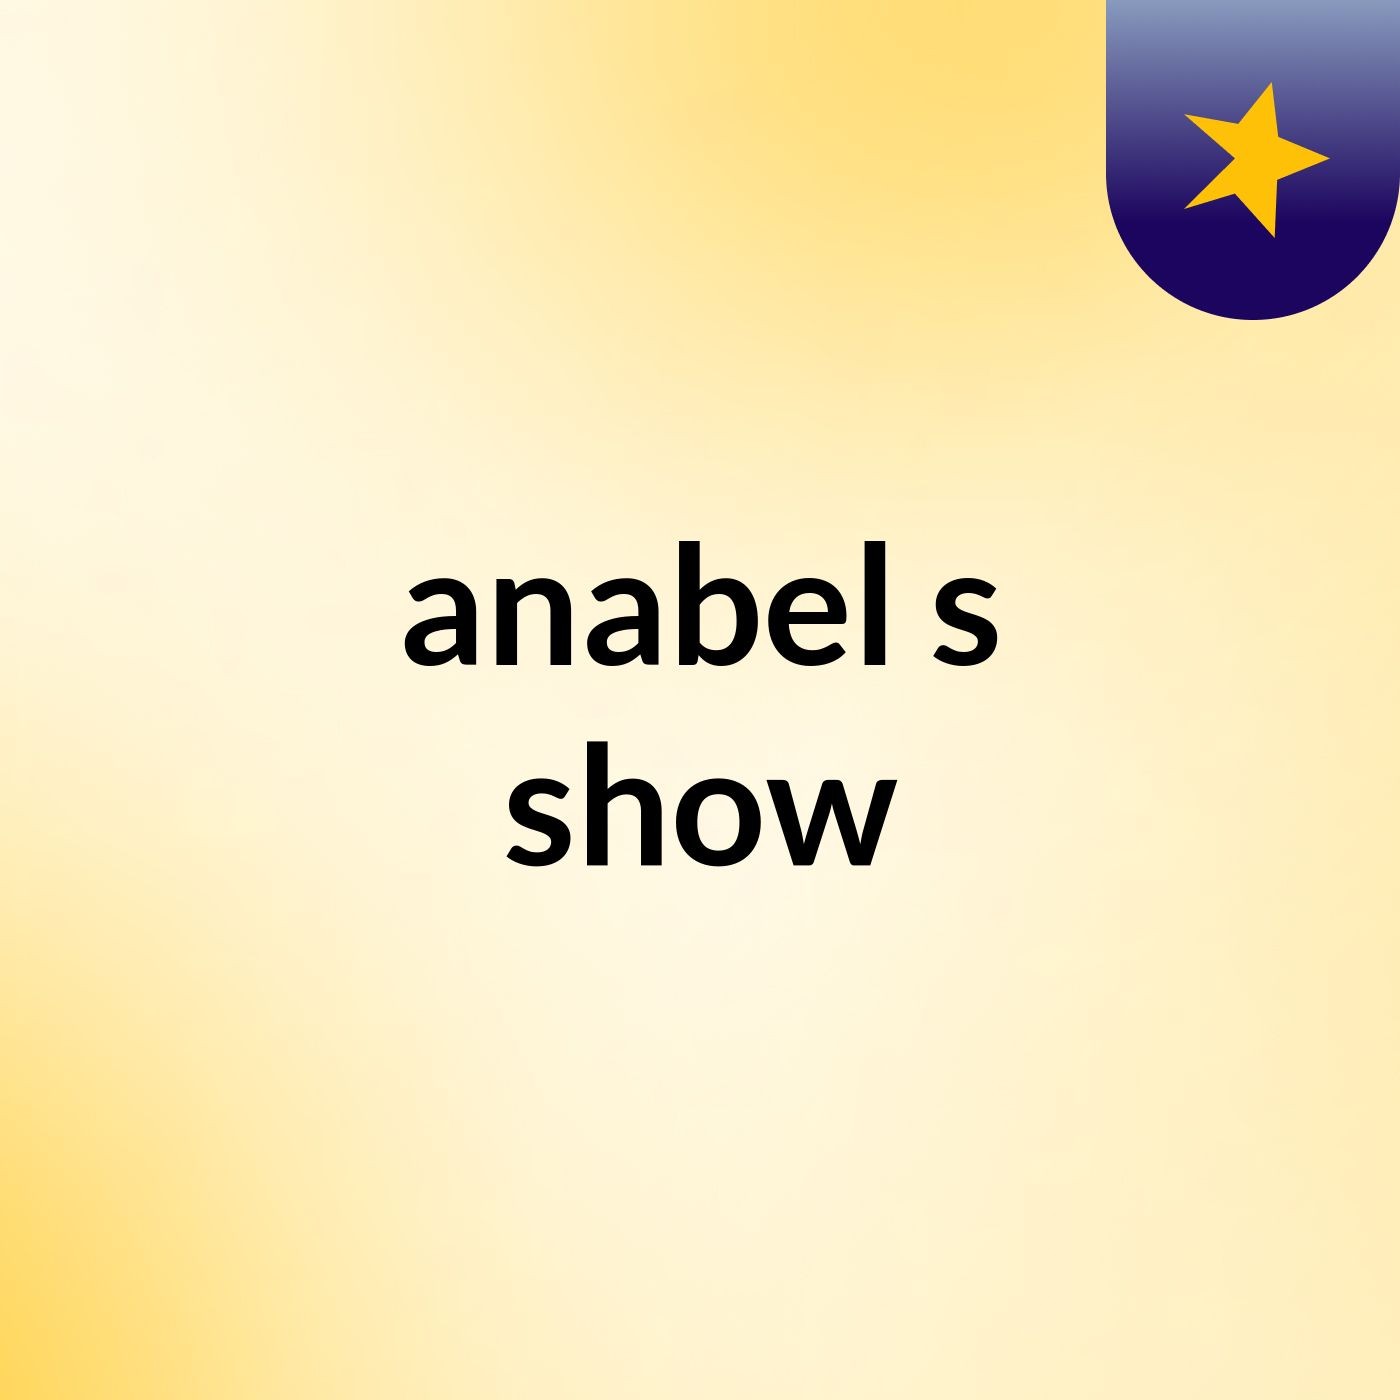 anabel's show